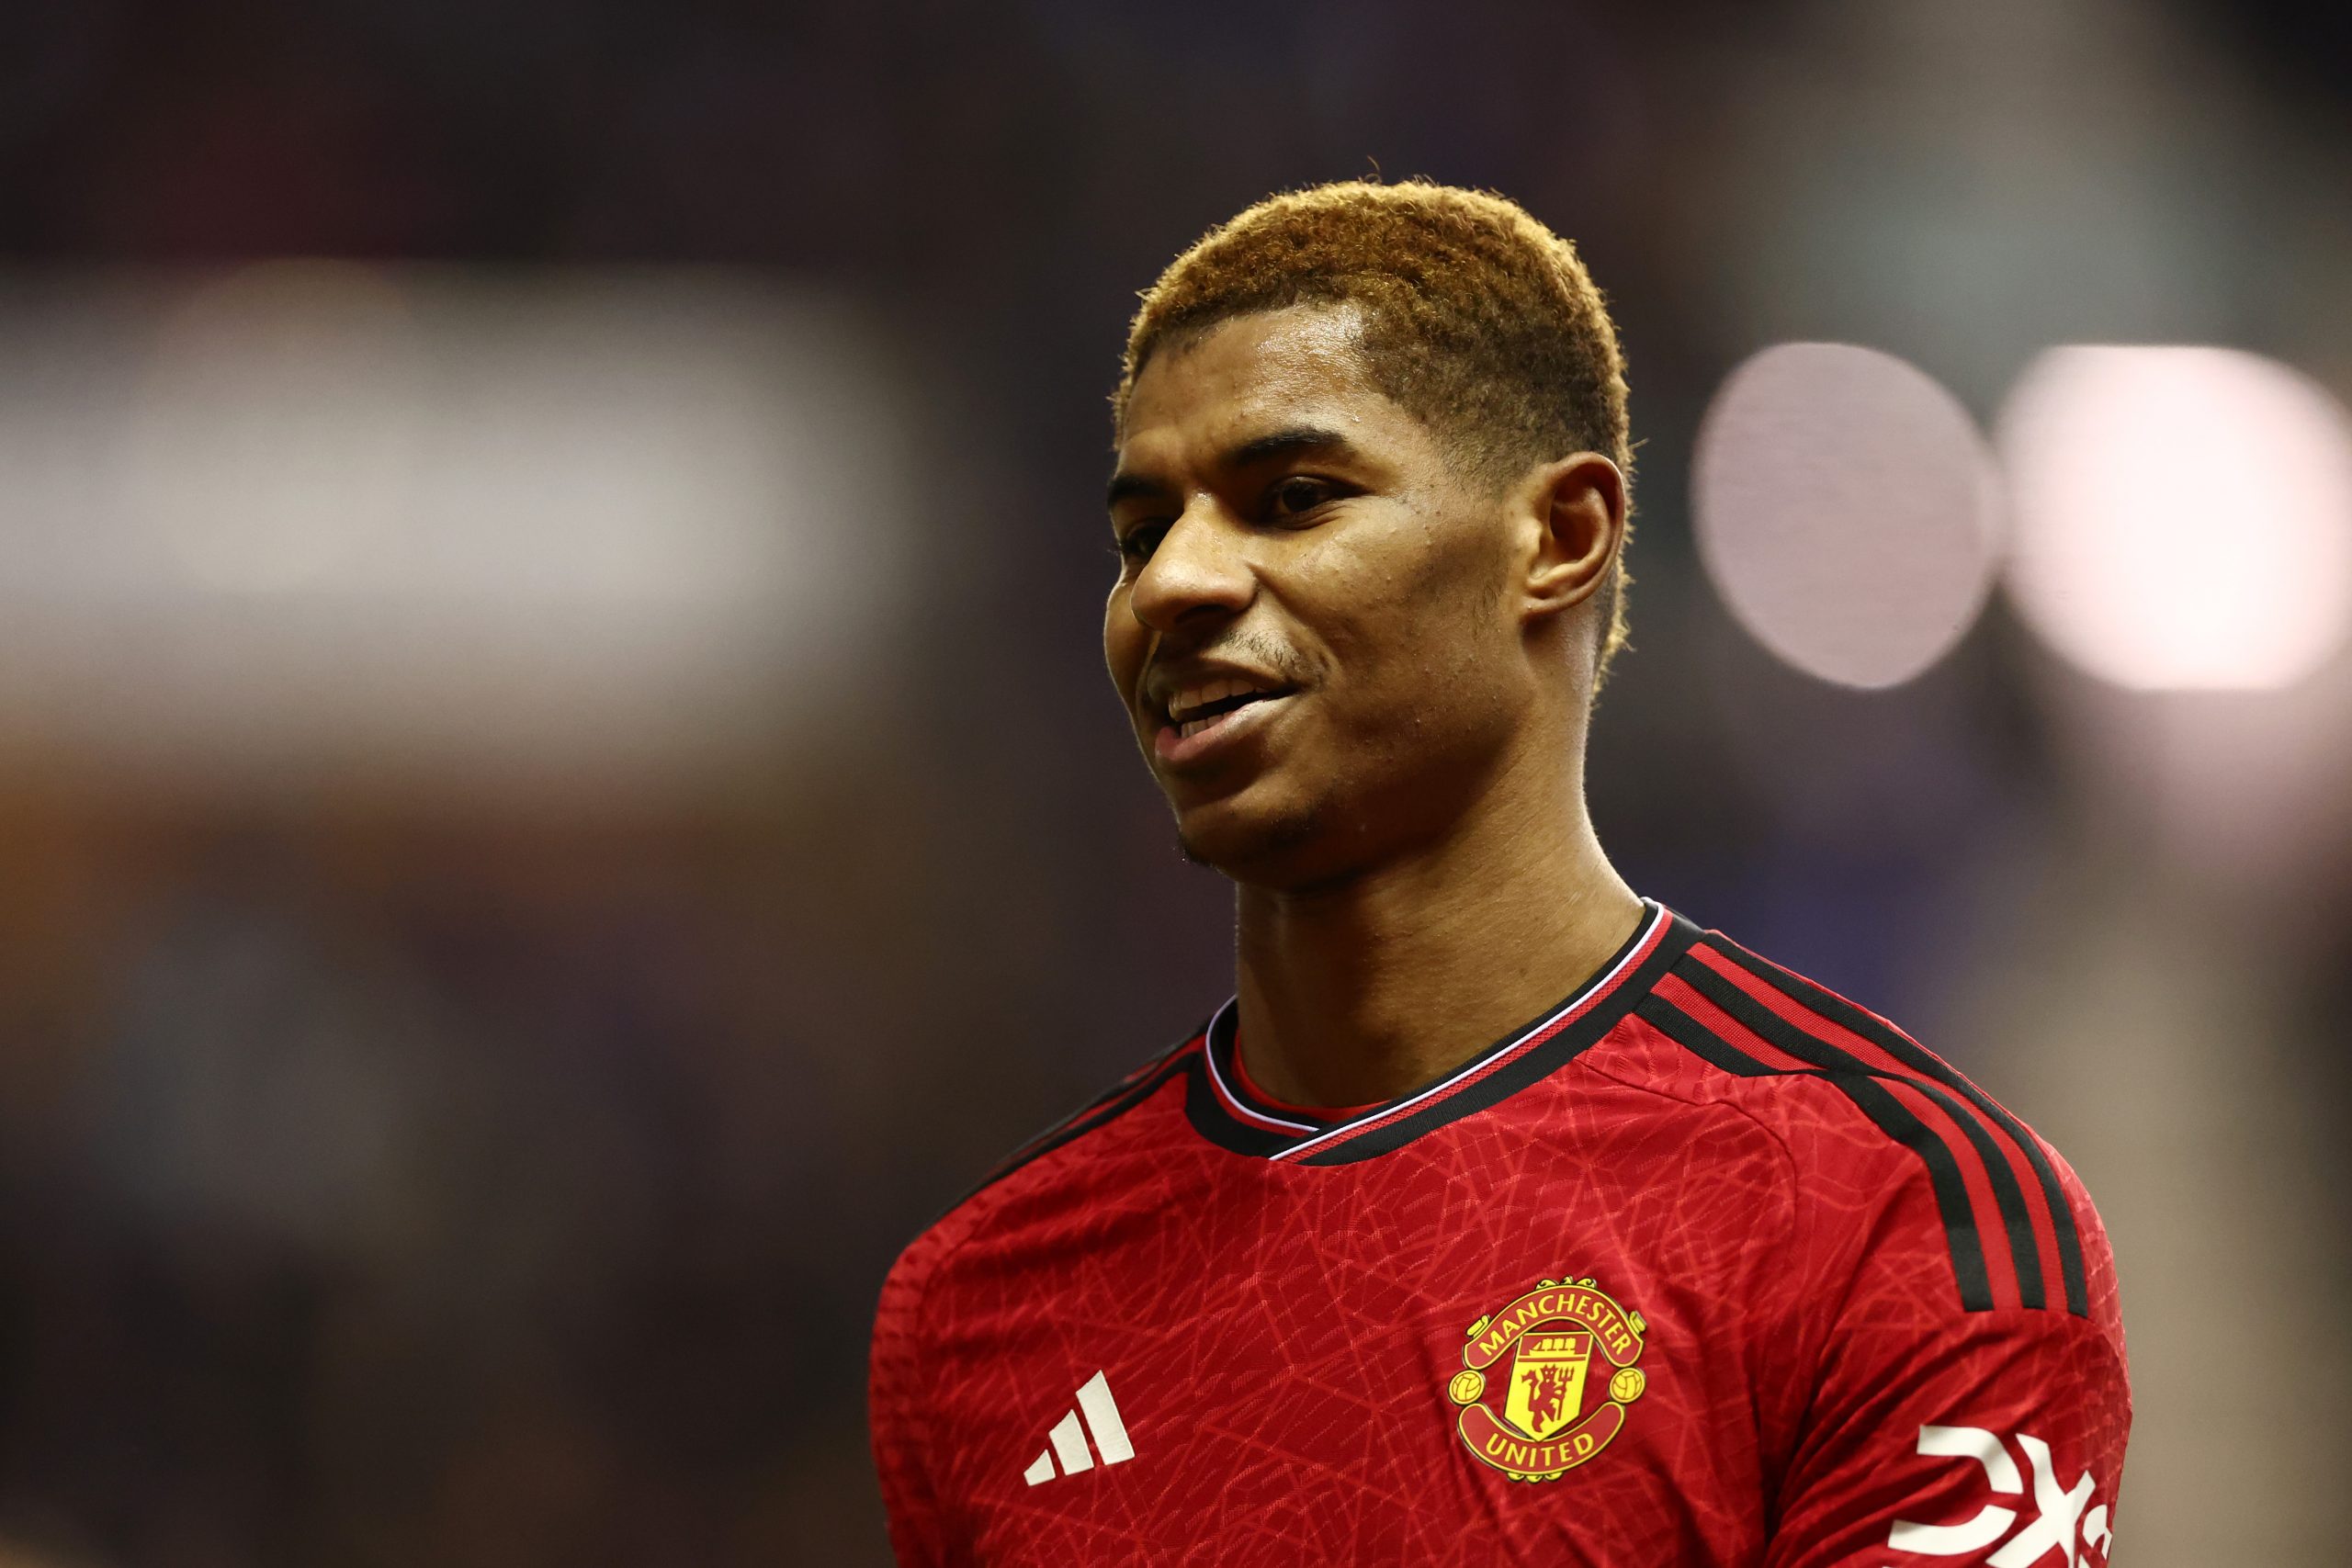 Manchester United's Marcus Rashford is slowly getting back into form and has recorded one goal and two assists over his last three games